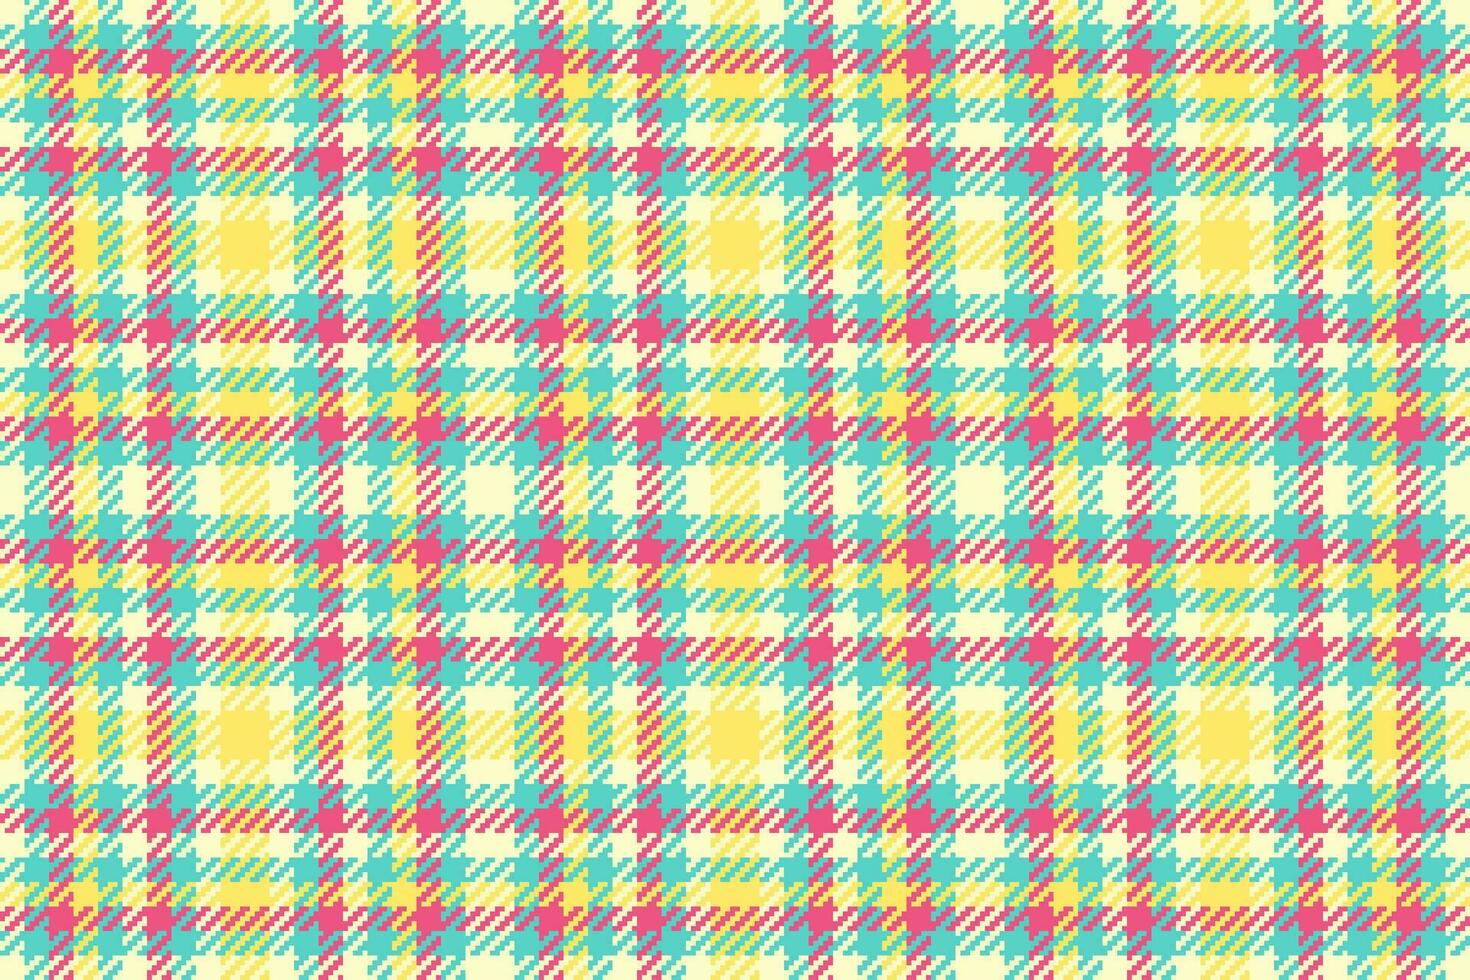 Plaid fabric check of pattern background seamless with a vector tartan texture textile.